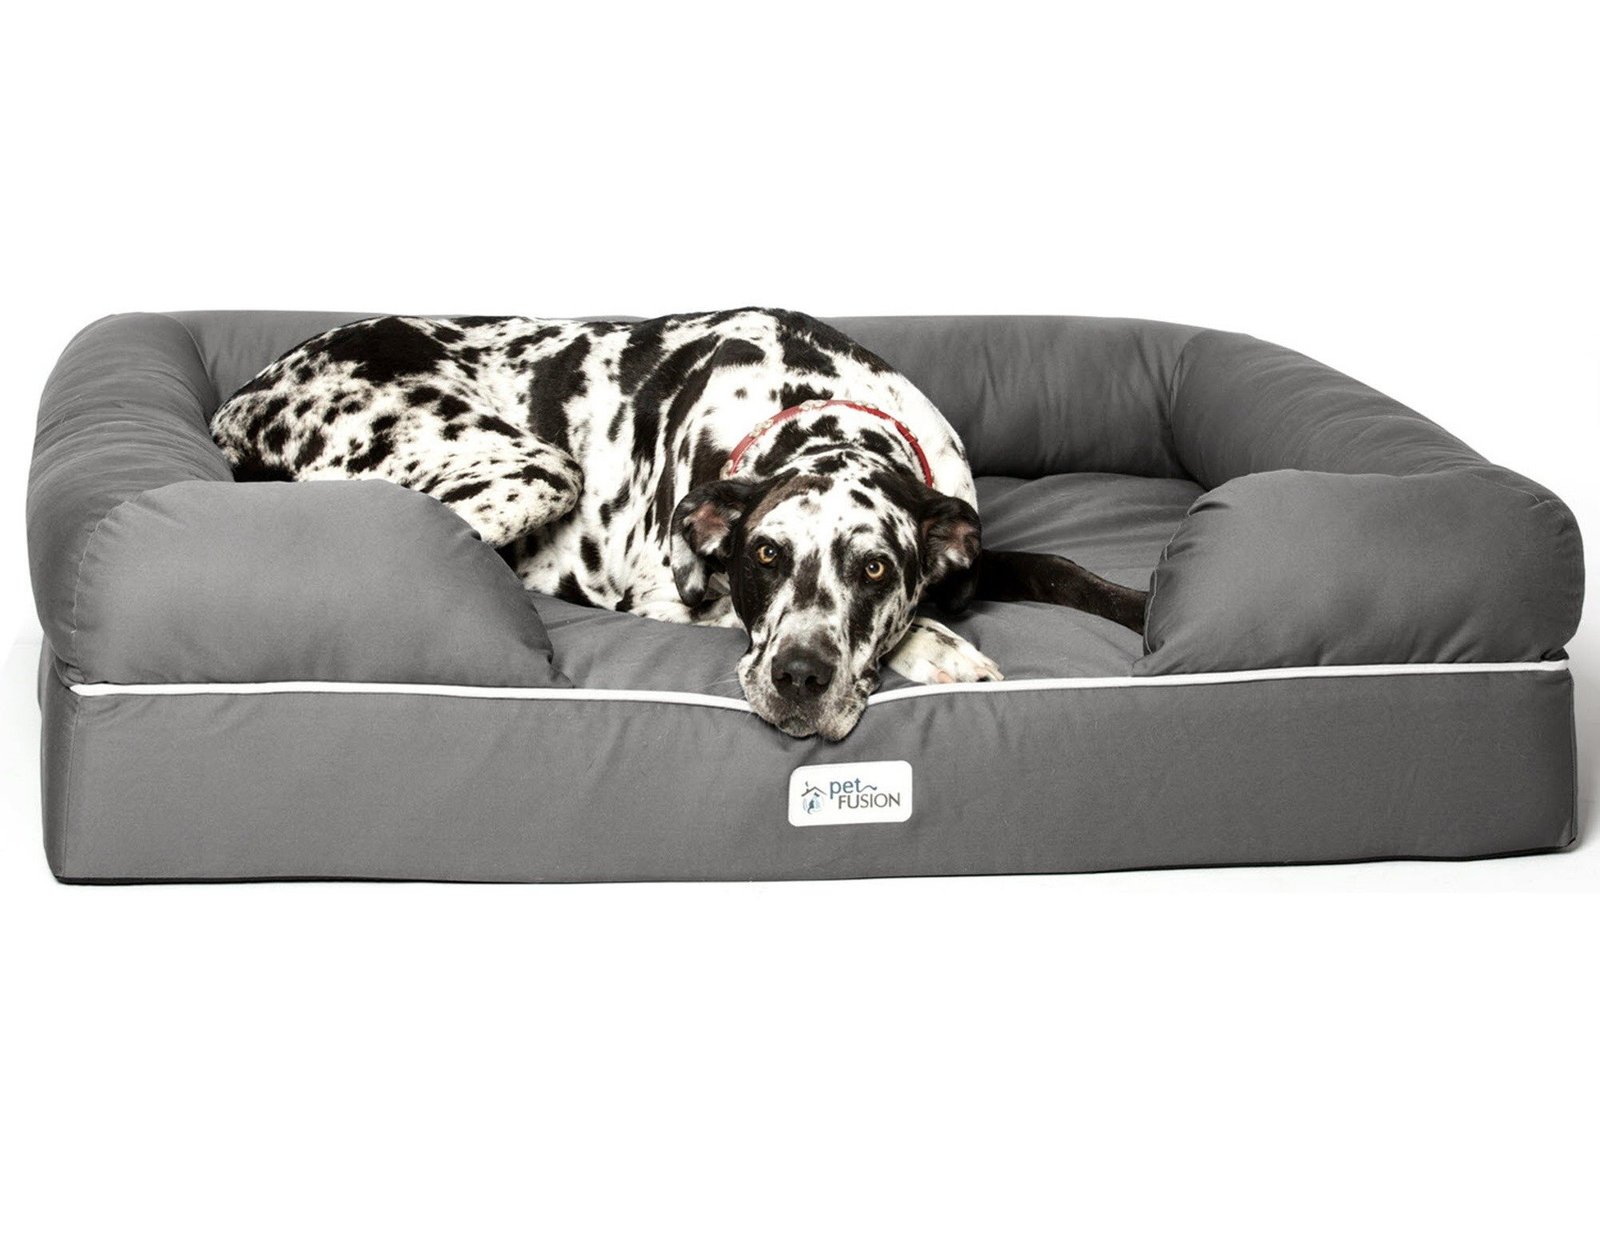 Why Petfusion Ultimate Dog Bed Will Change Your Life